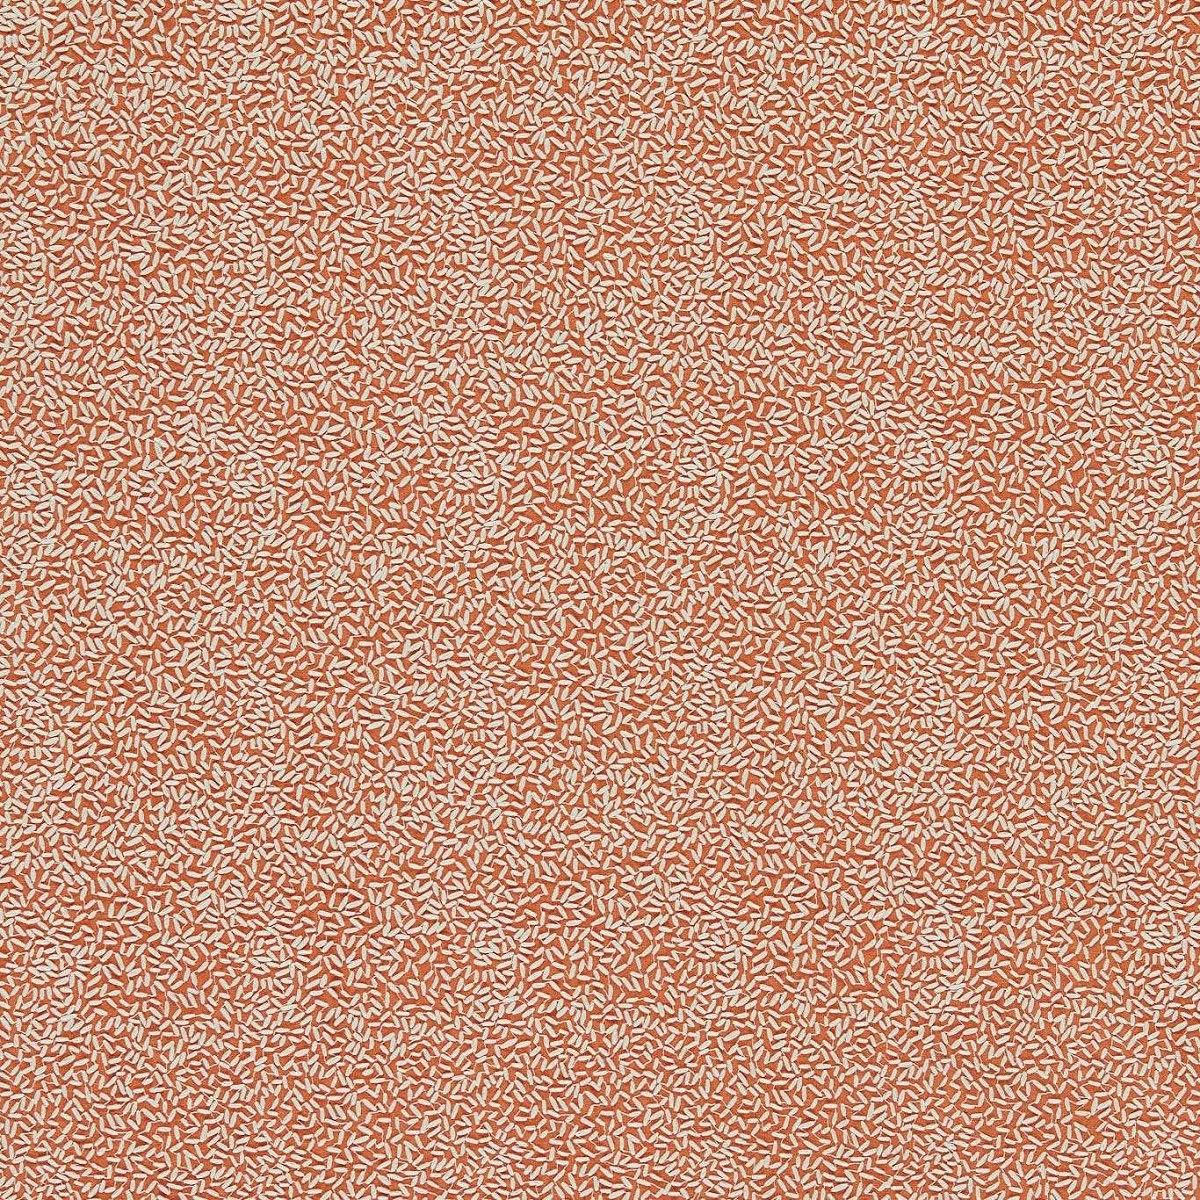 Sow Baked Terracotta/Soft Focus Fabric by Harlequin